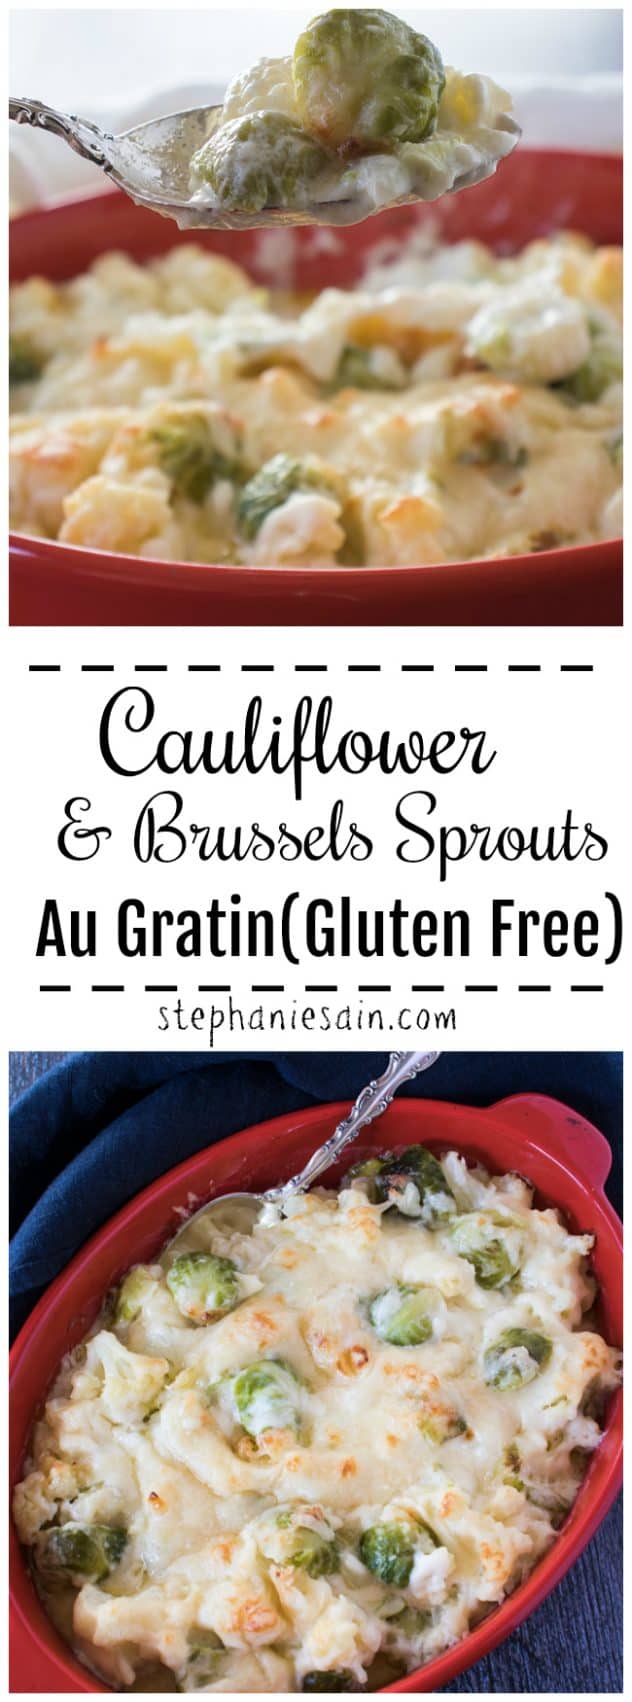 This Cauliflower Au Gratin is made extra special with the addition of brussels sprouts. Creamy, cheesy, & delicious with a light golden crust. Great for a holiday side or anytime you want a special dish. Gluten Free.